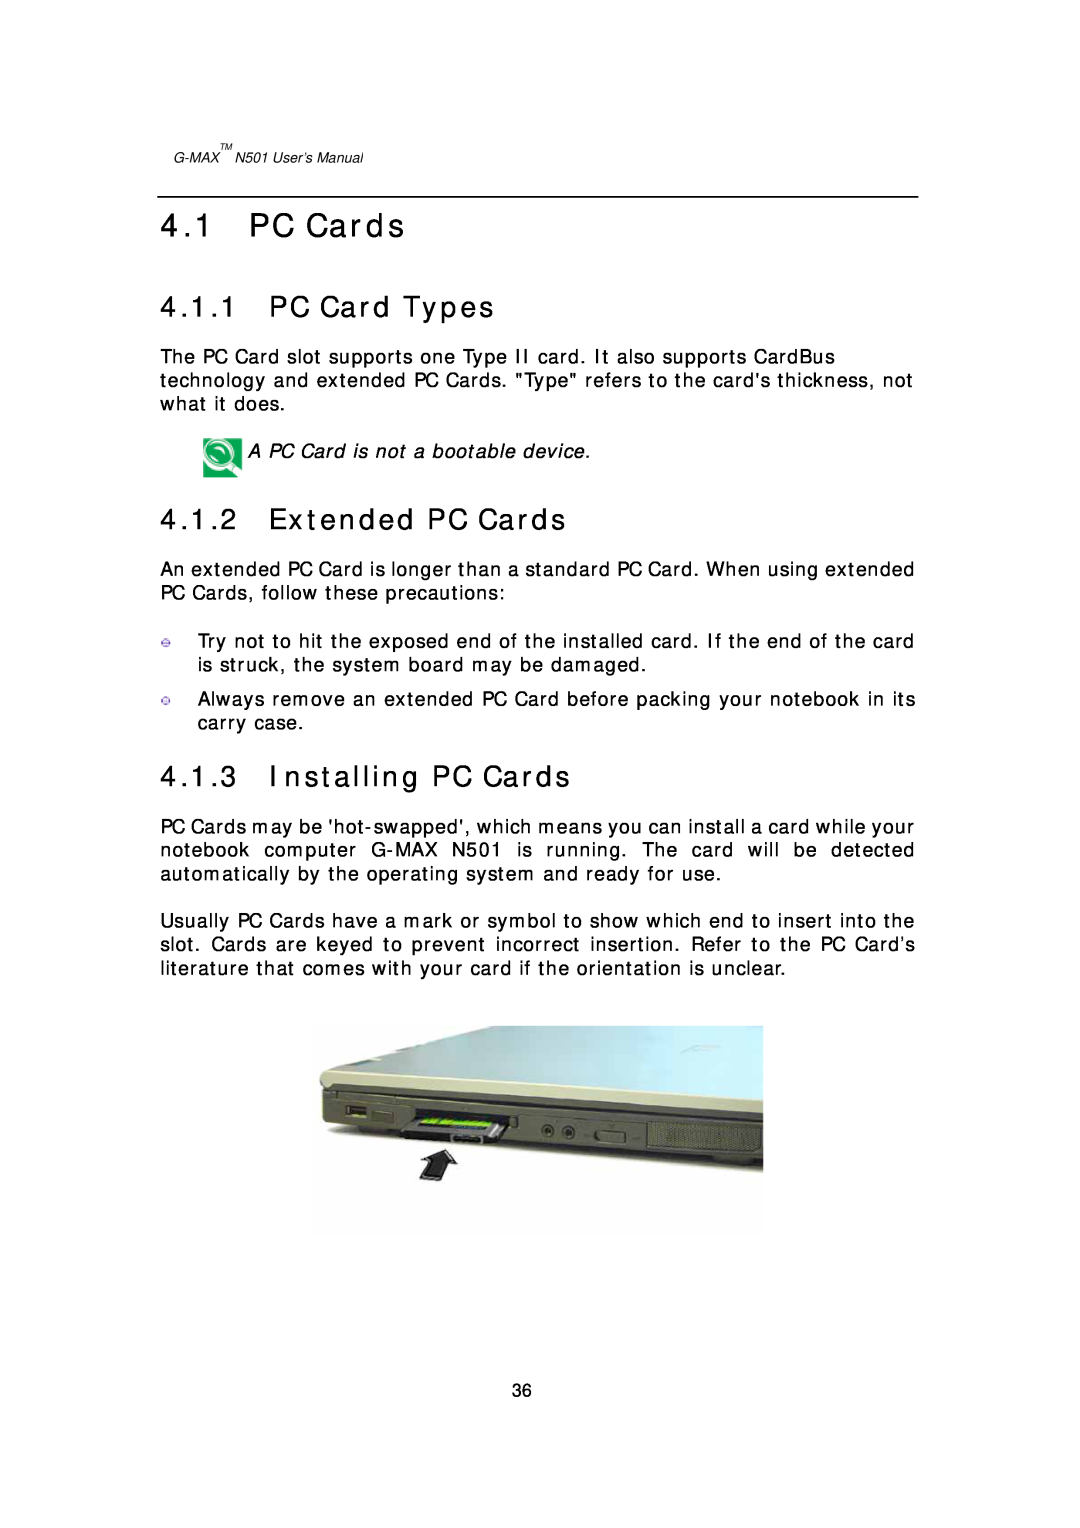 Gigabyte G-MAX N501 user manual PC Card Types, Extended PC Cards, Installing PC Cards 